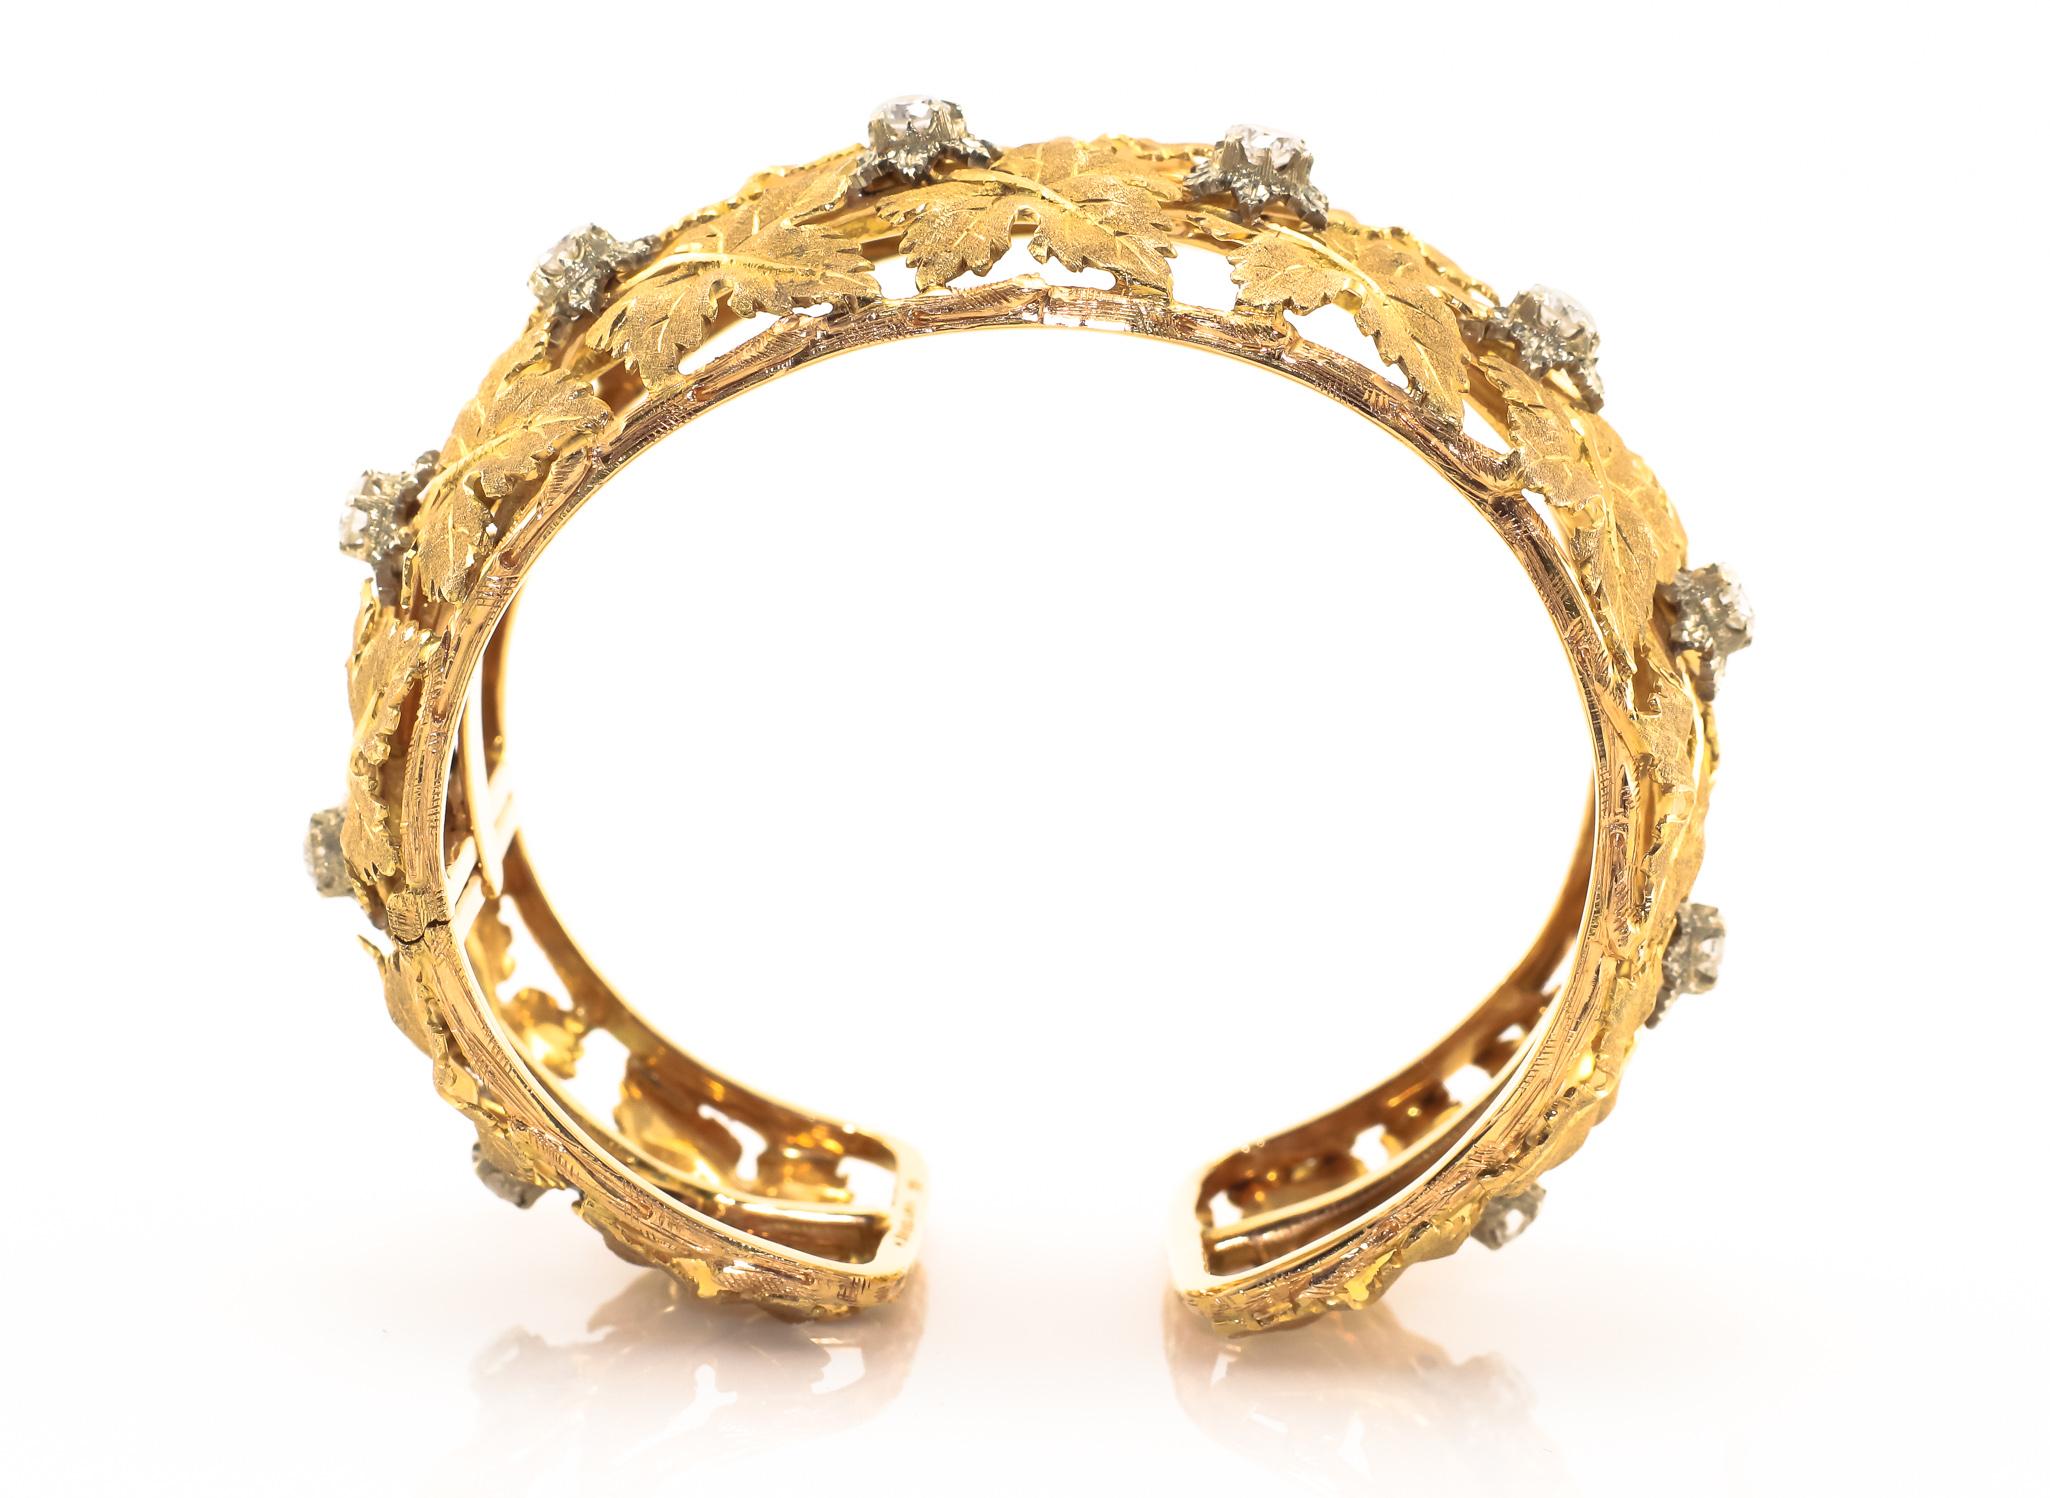 A Genuine Mario Buccellati Cuff Bracelet that features The Quintessential Grape Leaf Motif.  Masterfully crafted from Solid 18 Karat Yellow and White Gold. This exceptional piece features both Buccellati's highly specialized engraving techniques and